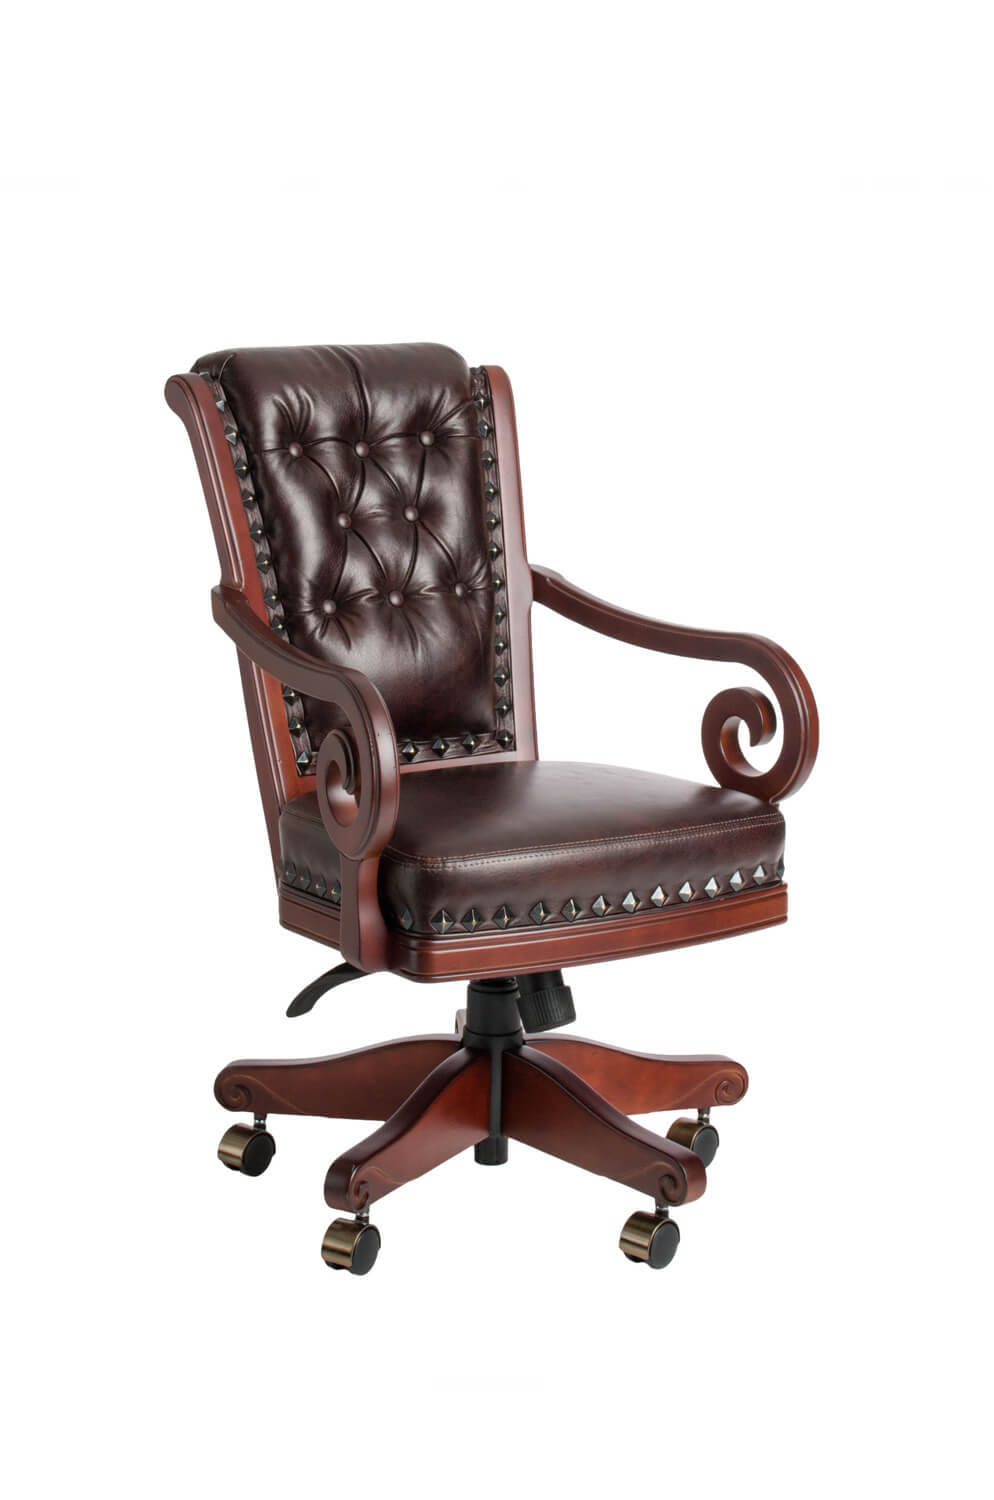 Pizarro Maple Adjustable Swivel Game Chair with Arms